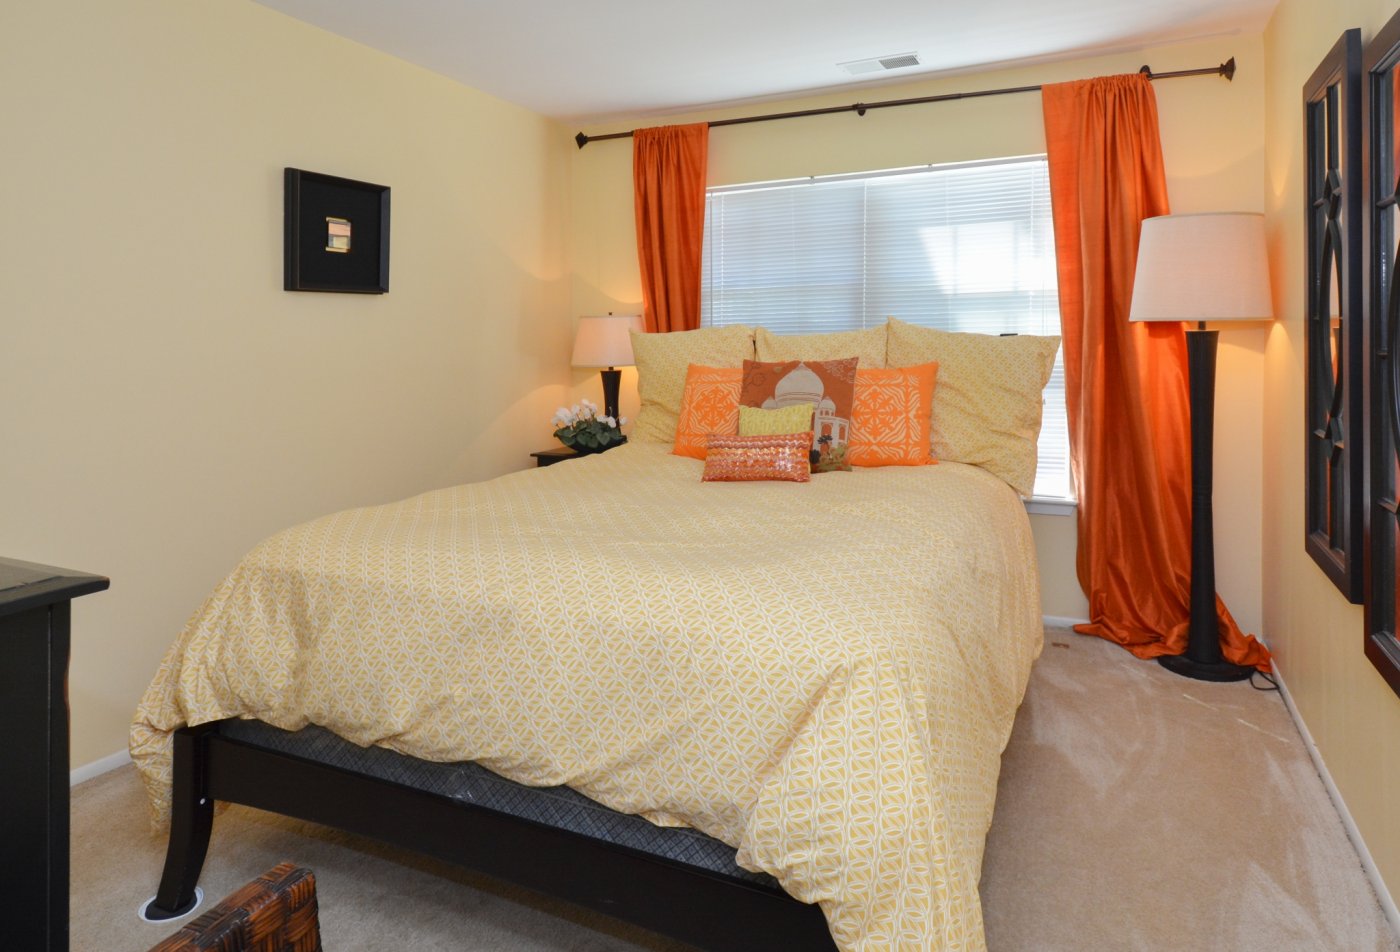 Spacious Master Bedroom | Apartments Homes for rent in Laurel, MD | Spring House Apartments